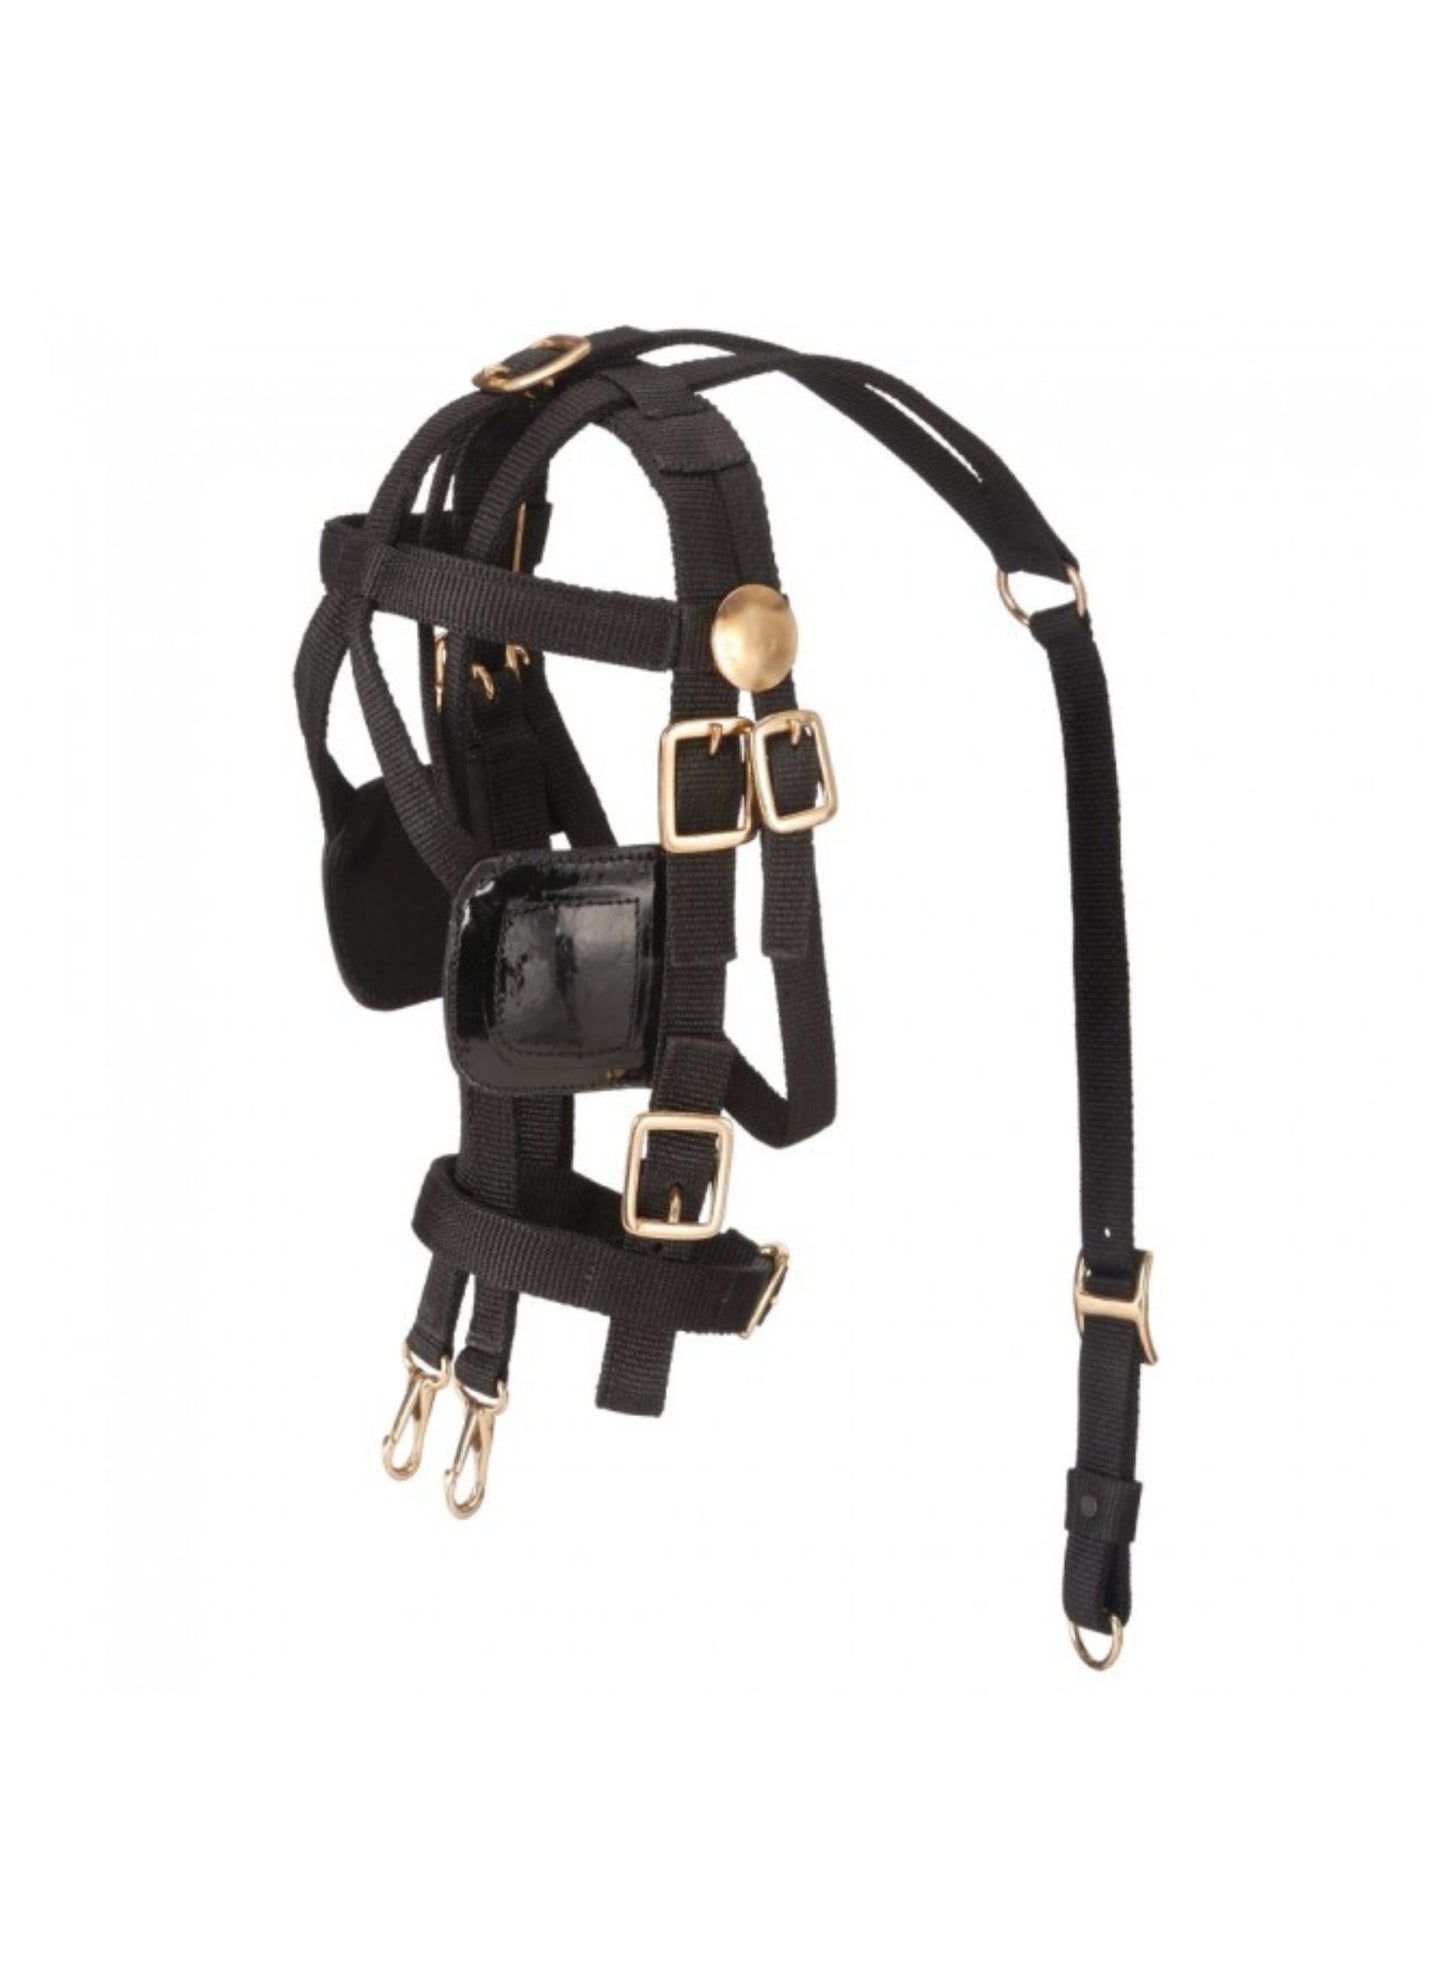 Mini Leather Replacement Bridle